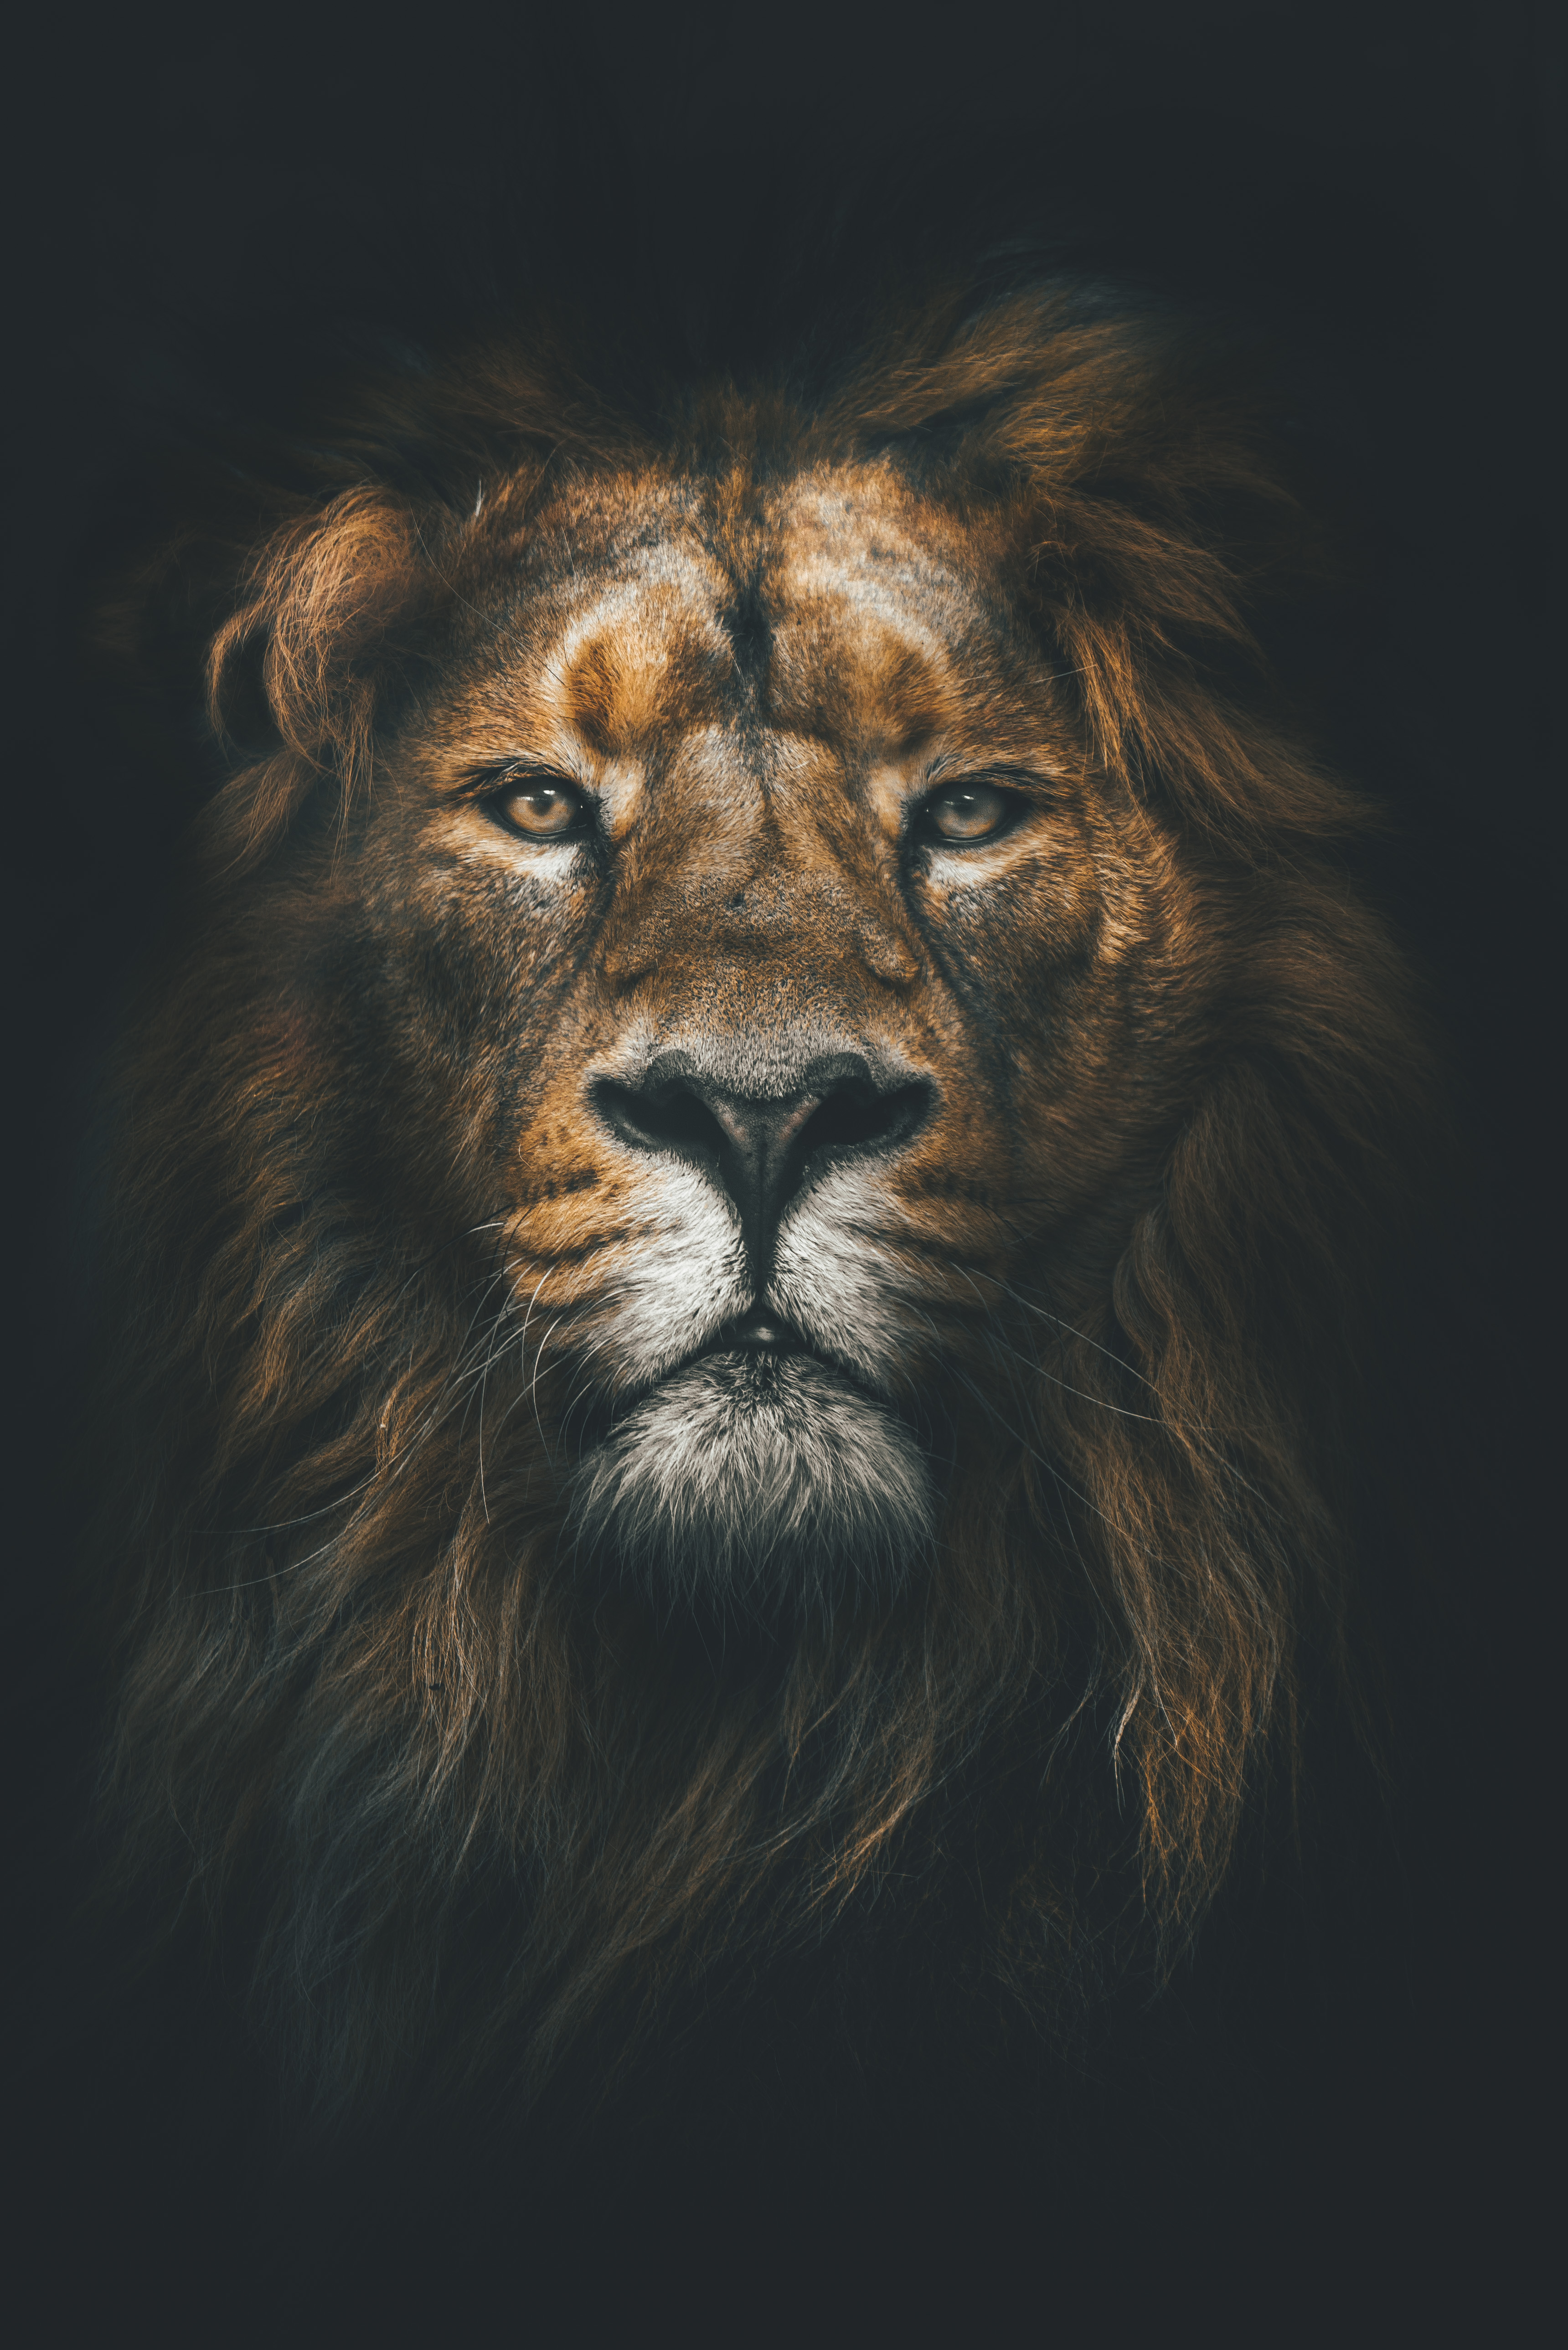 Wallpapers lion wild nature nature on the desktop